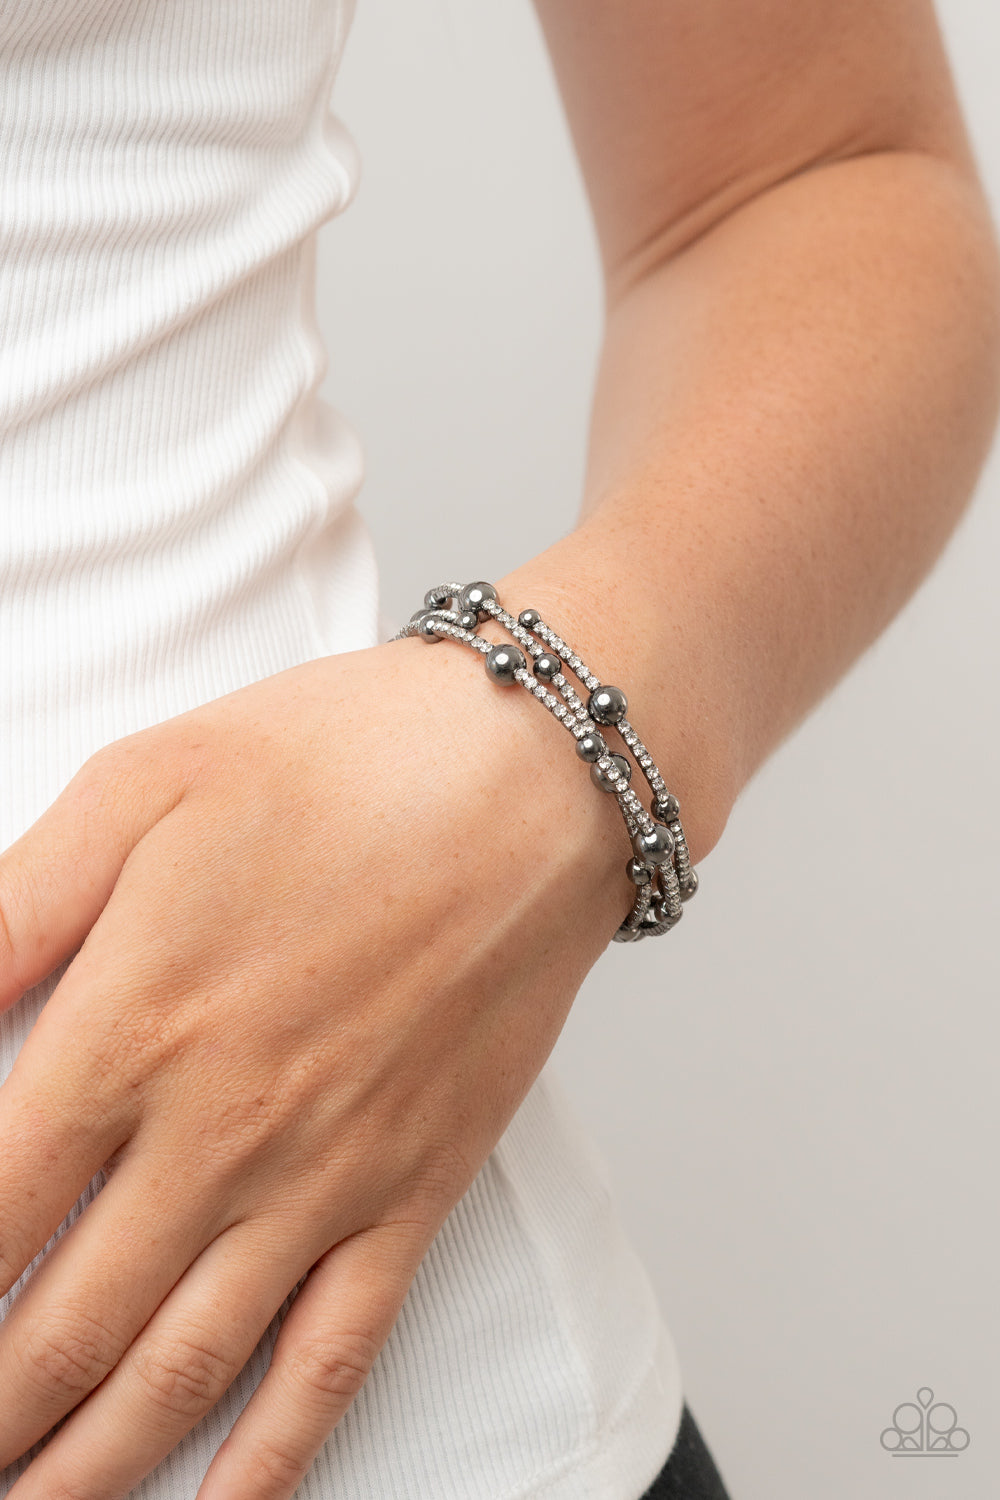 Spontaneous Shimmer Black Bracelet - Paparazzi Accessories  Spontaneously interrupted by glistening gunmetal beads, a sparkly strand of white rhinestones coils around the wrist, resulting in an irresistible infinity wrap bracelet.  Sold as one individual bracelet.